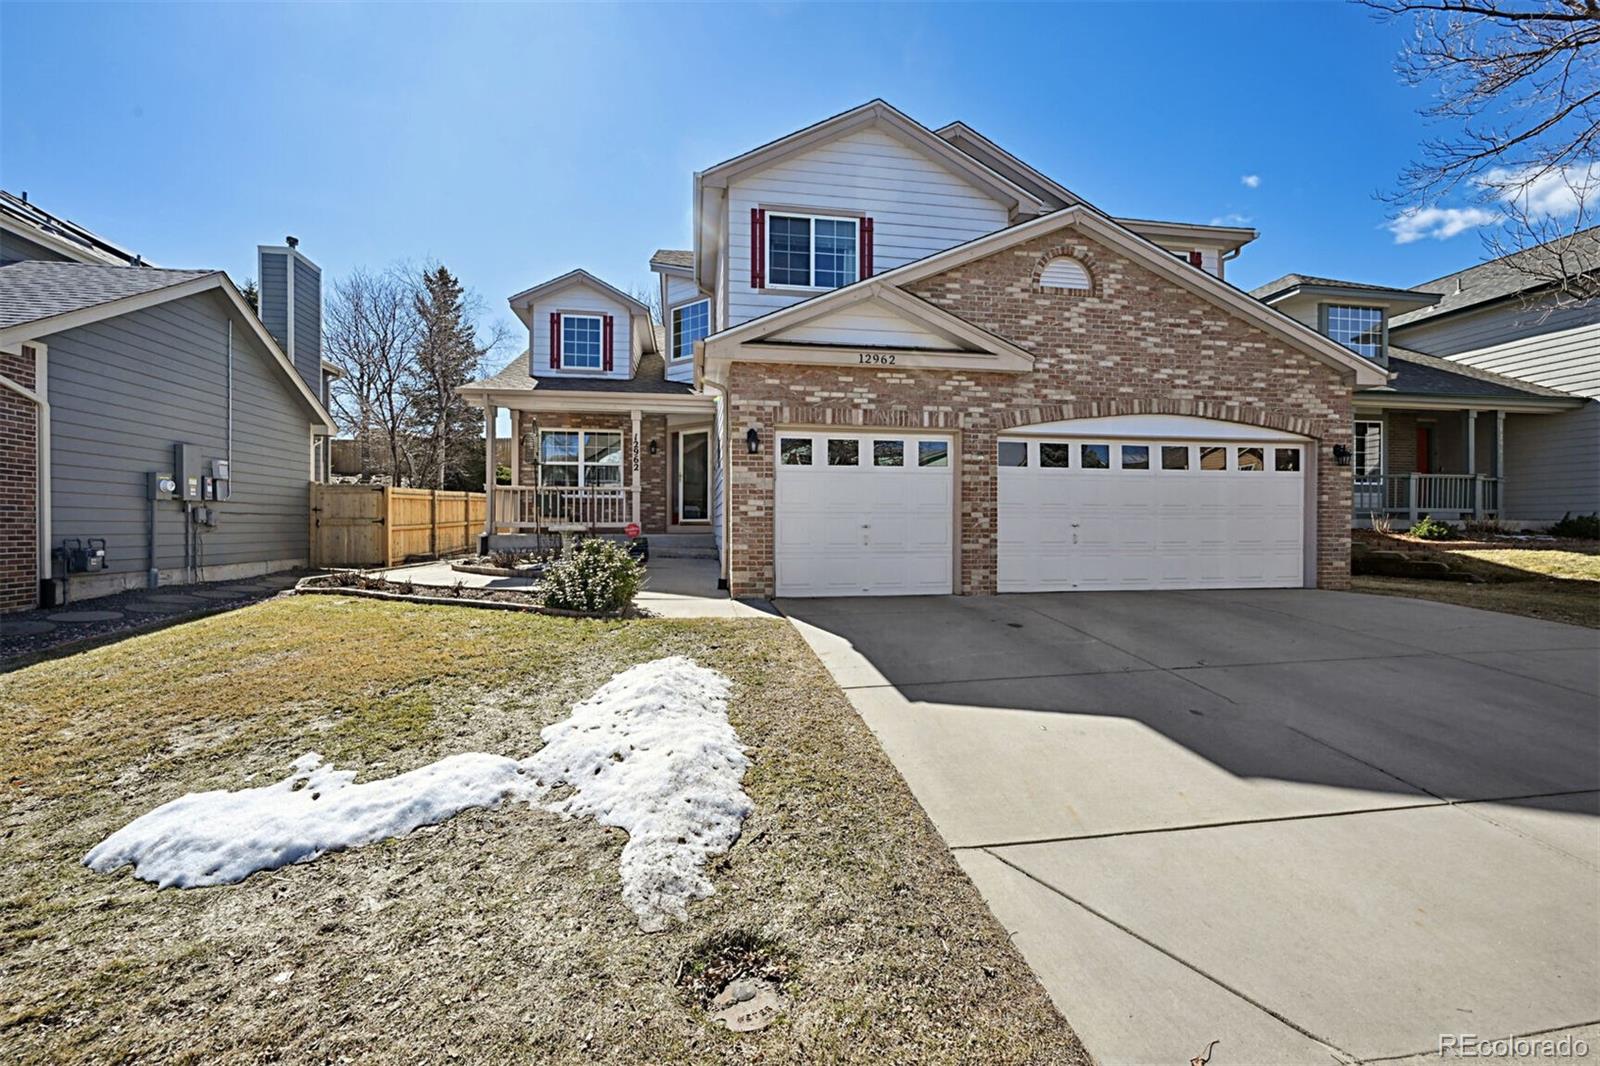 12962 W 84th Place, arvada MLS: 7600458 Beds: 4 Baths: 5 Price: $815,000